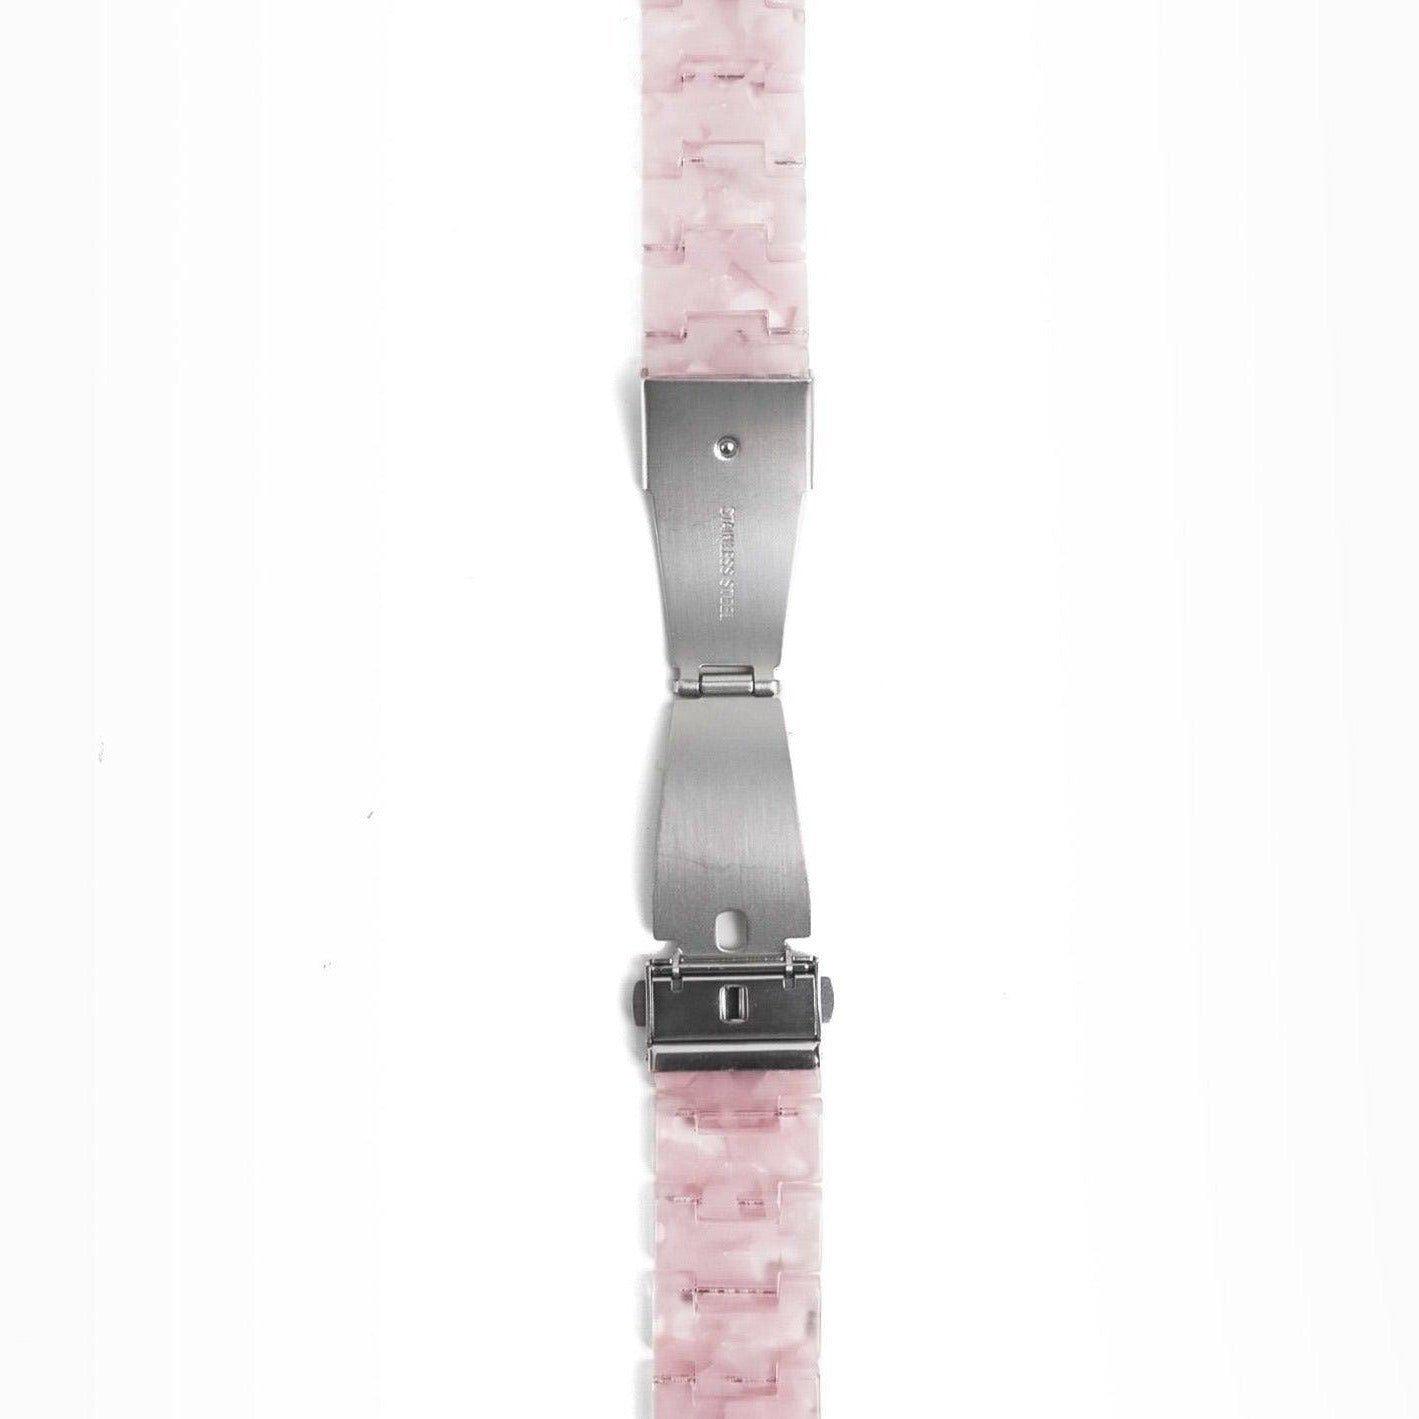 Polly Resin Apple Watch Band - Pink